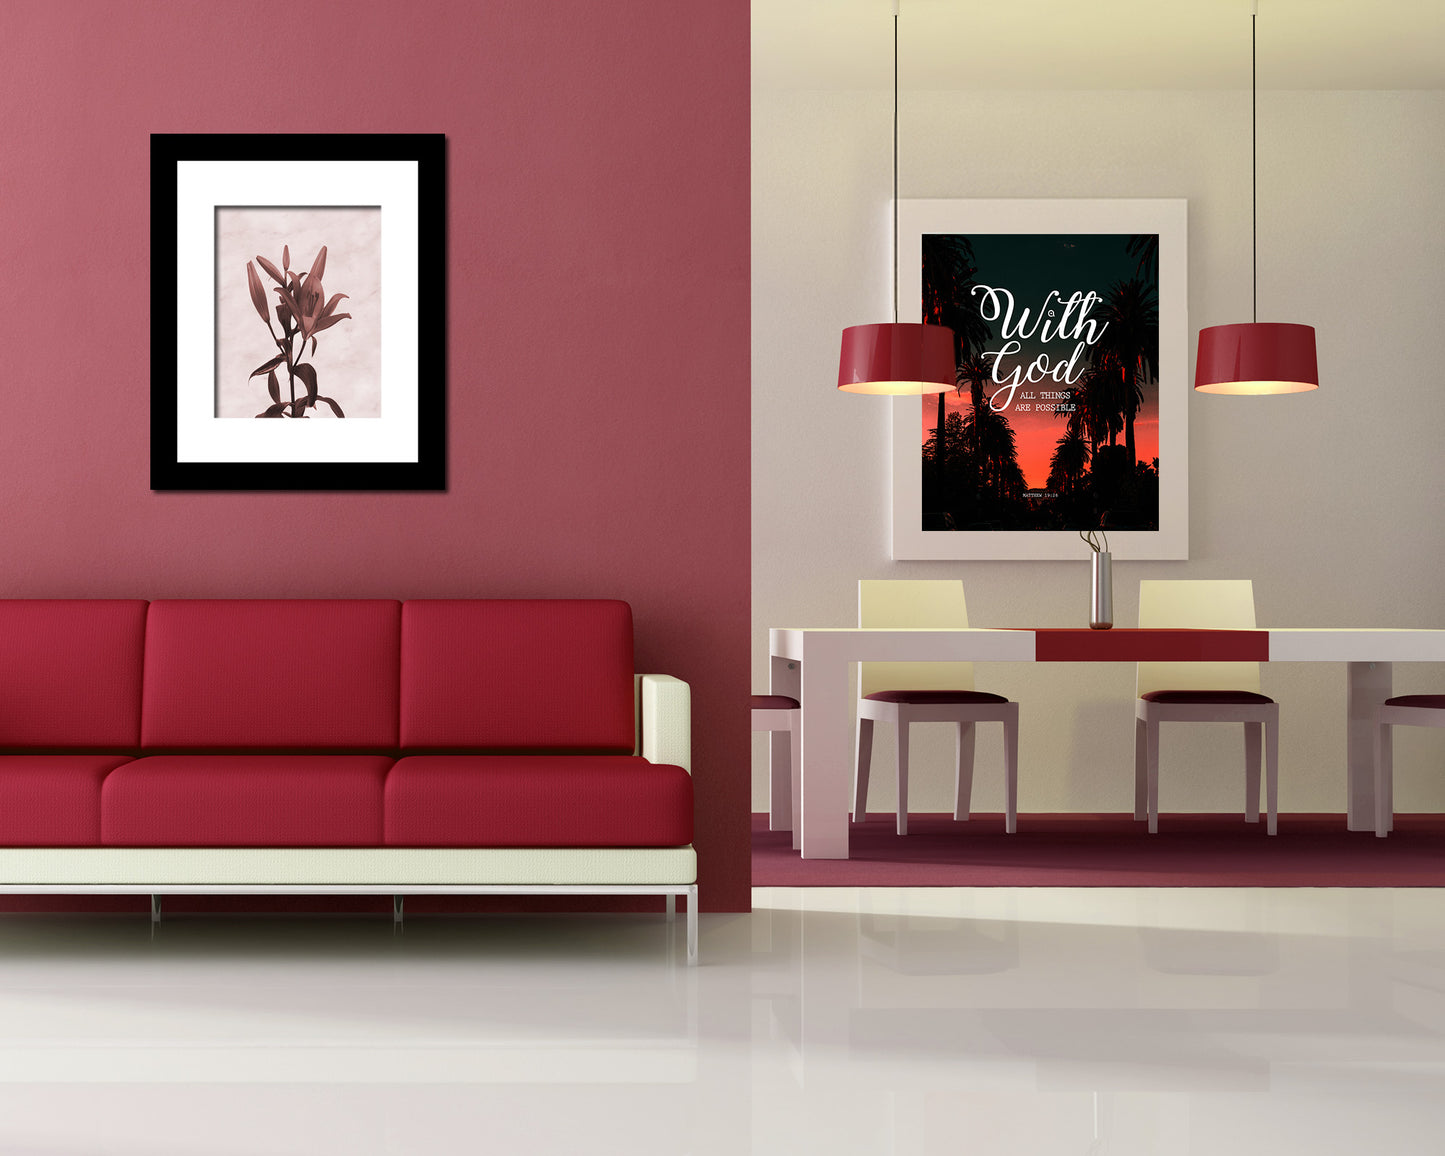 Red Lily Sepia Plants Art Wood Framed Print Wall Decor Gifts